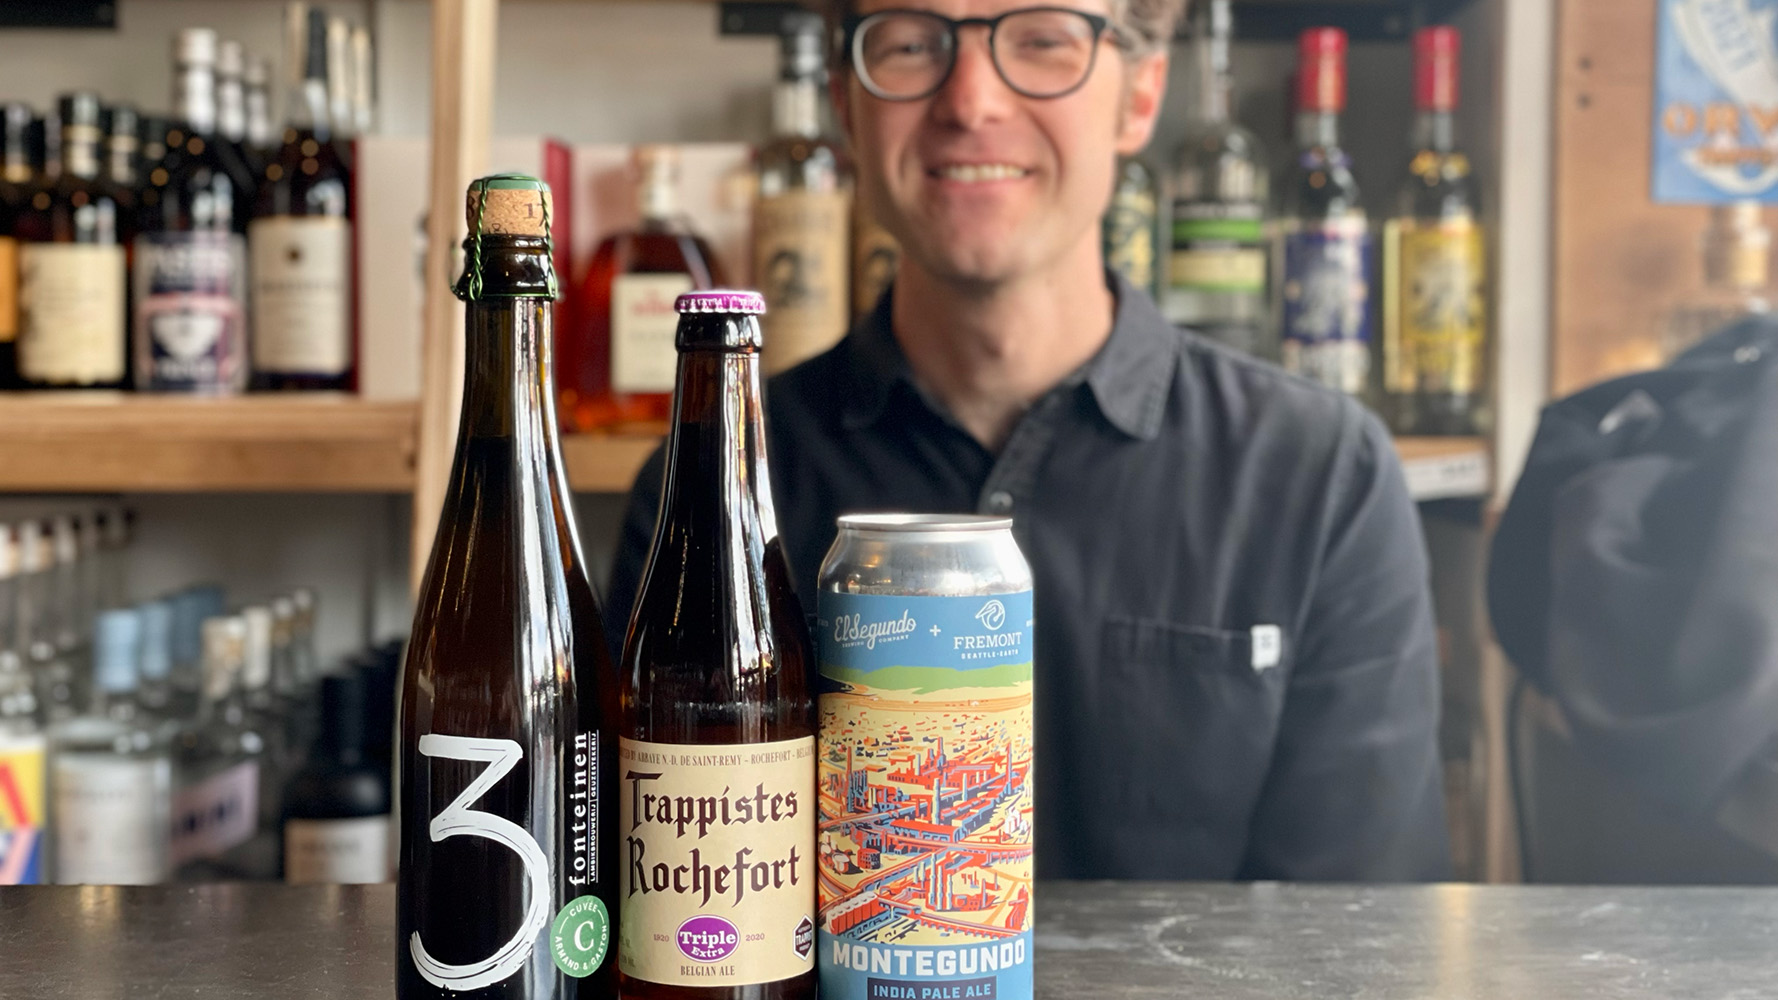 Beers of the week for March 7, 2022